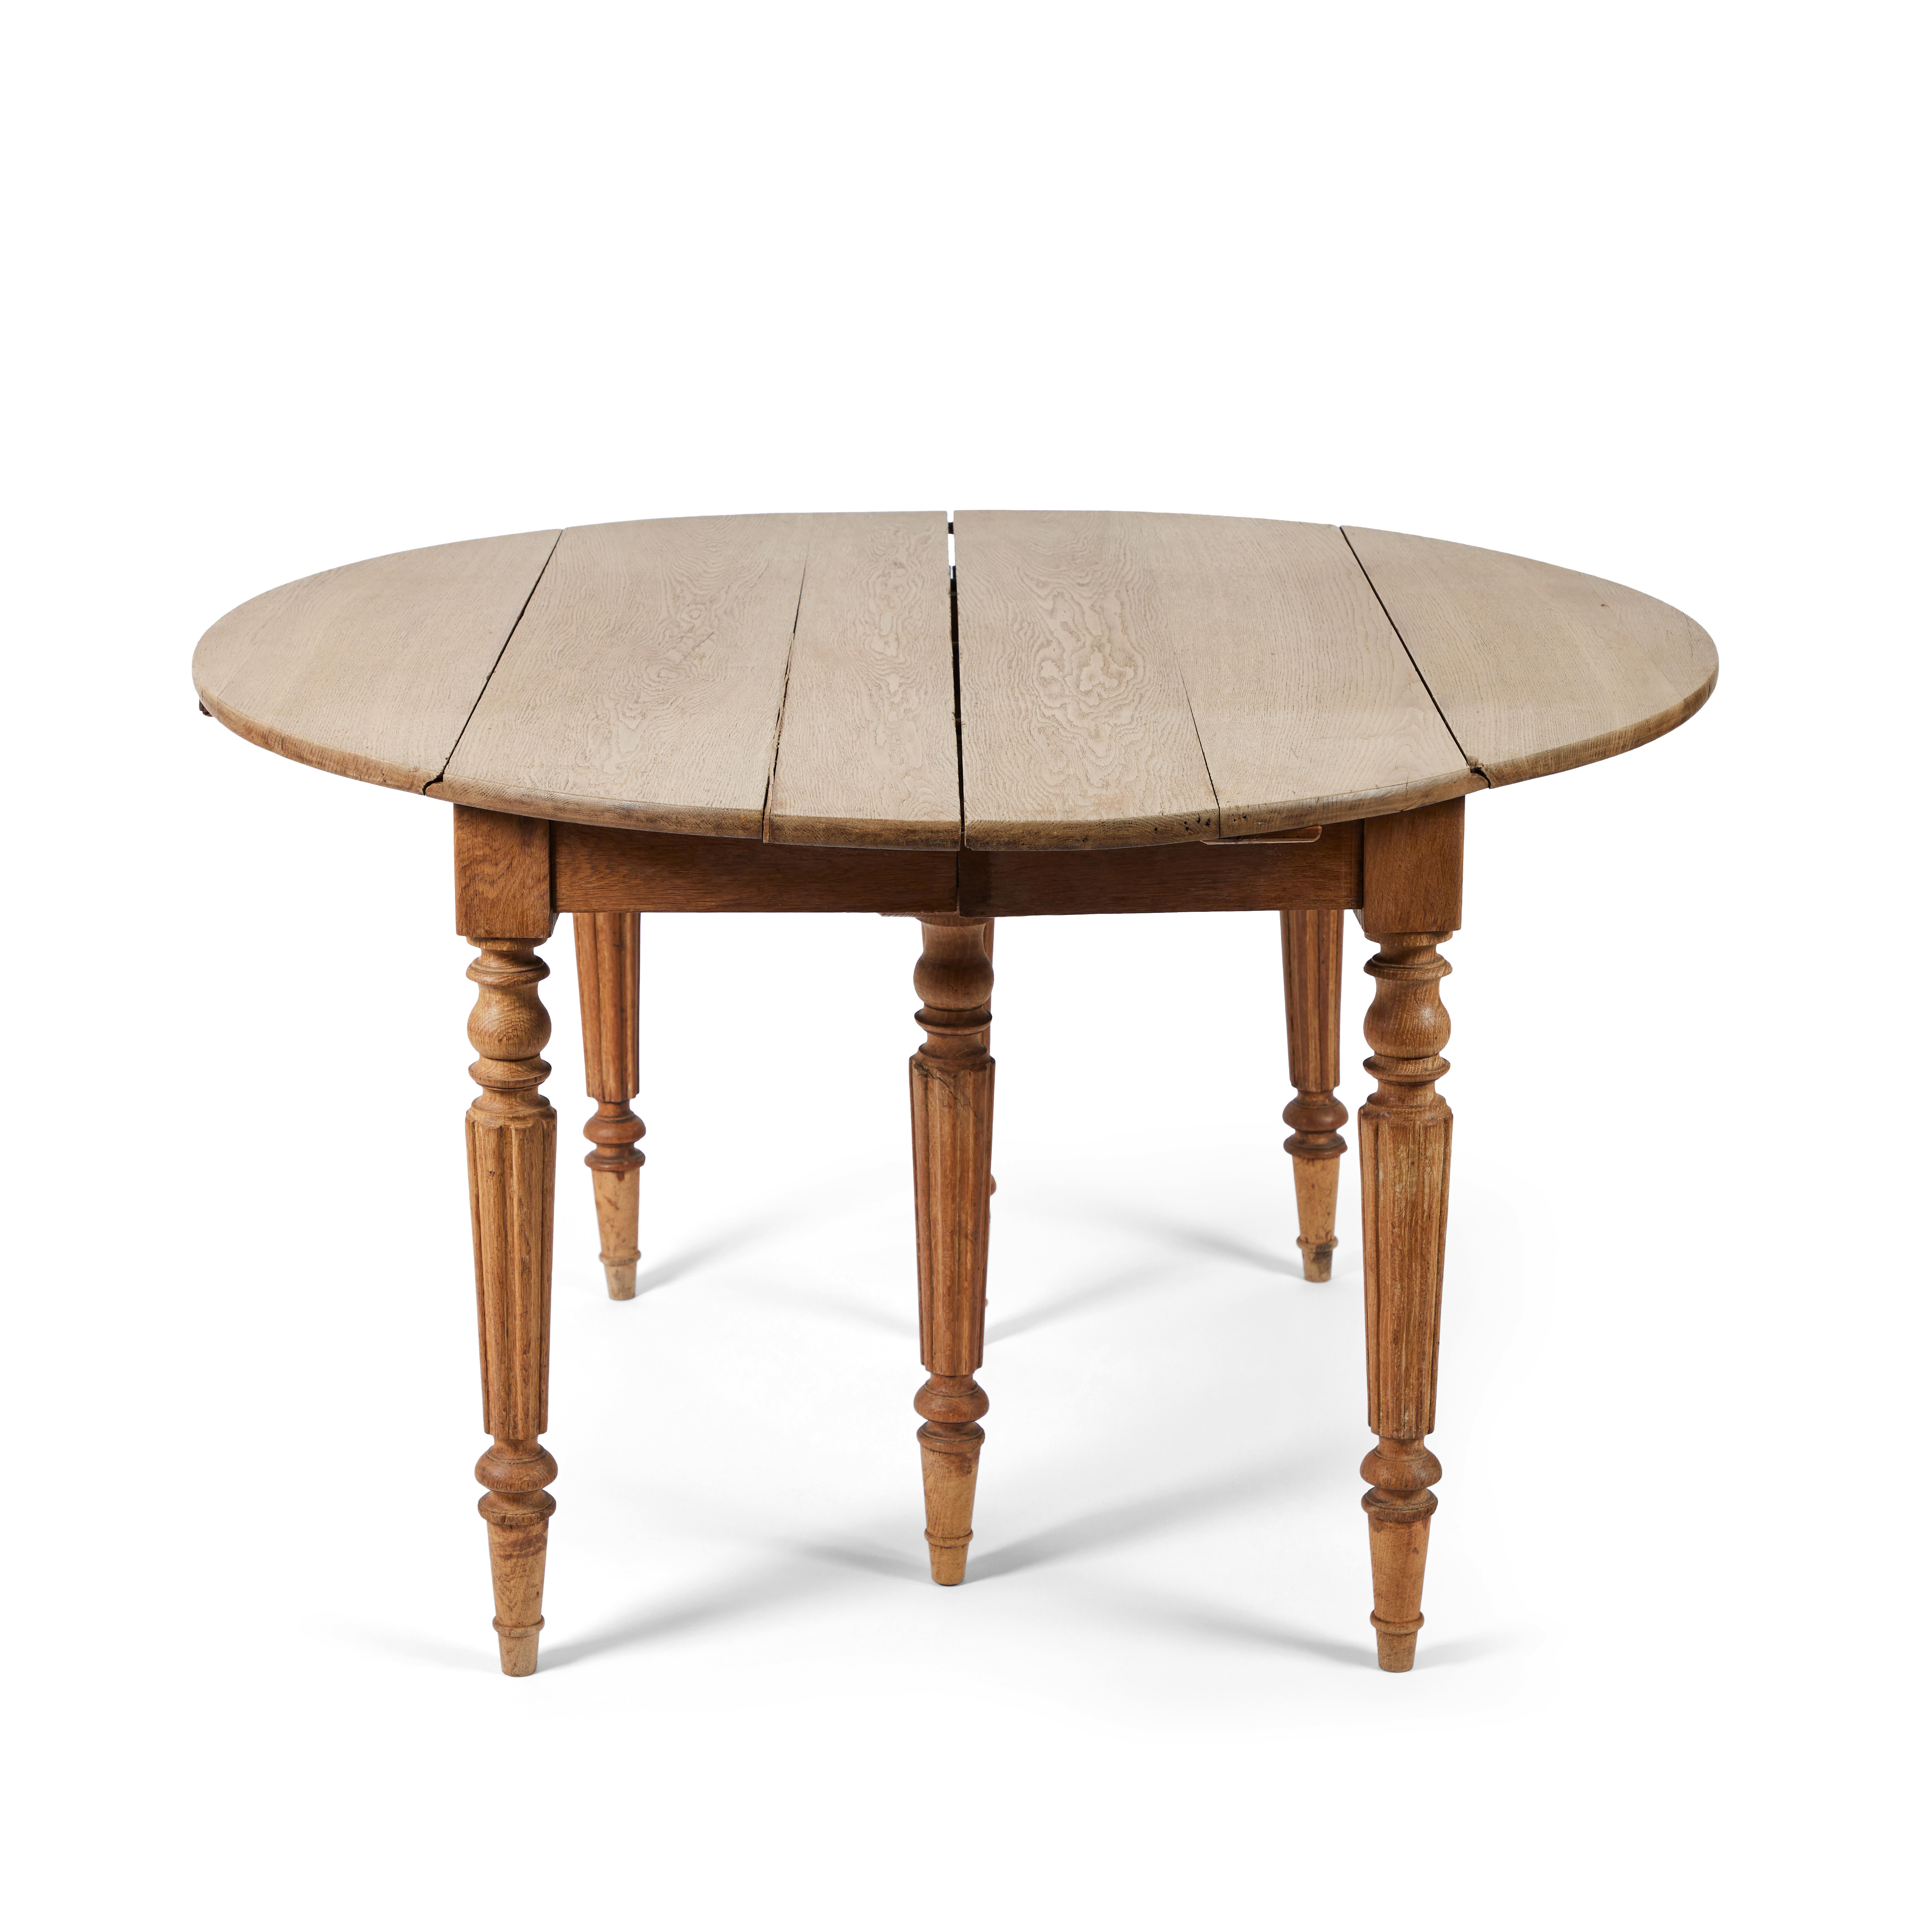 19th C. English Oak Expandable Dining Table with Four Leaves 1